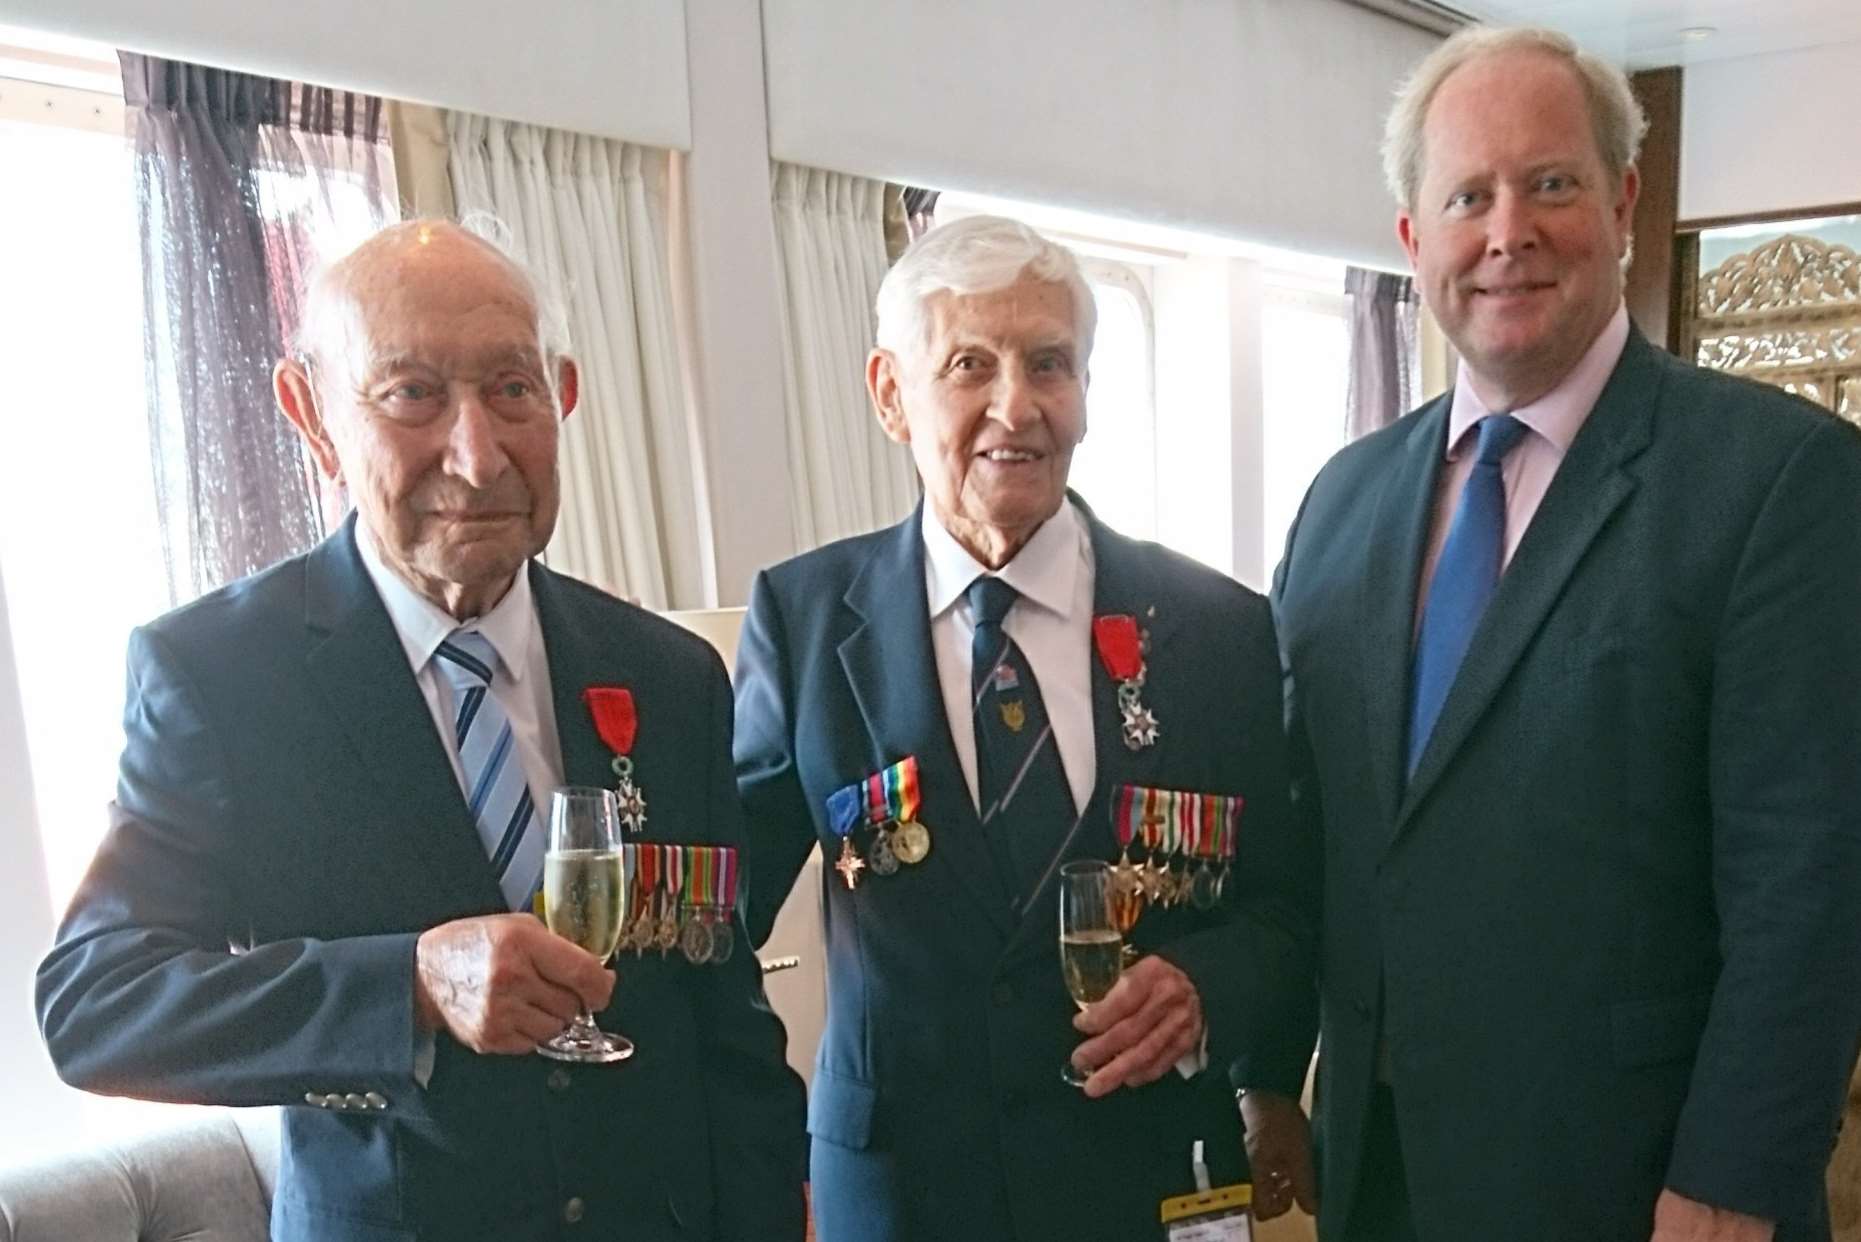 Presentation of Legion d'Honneur medals to Normandy veterans aboard Saga Sapphire cruise ship at Dover. Stanley Robert Elliss, left, and Richard Samson get medals from James Ryeland, managing director of George Hammond